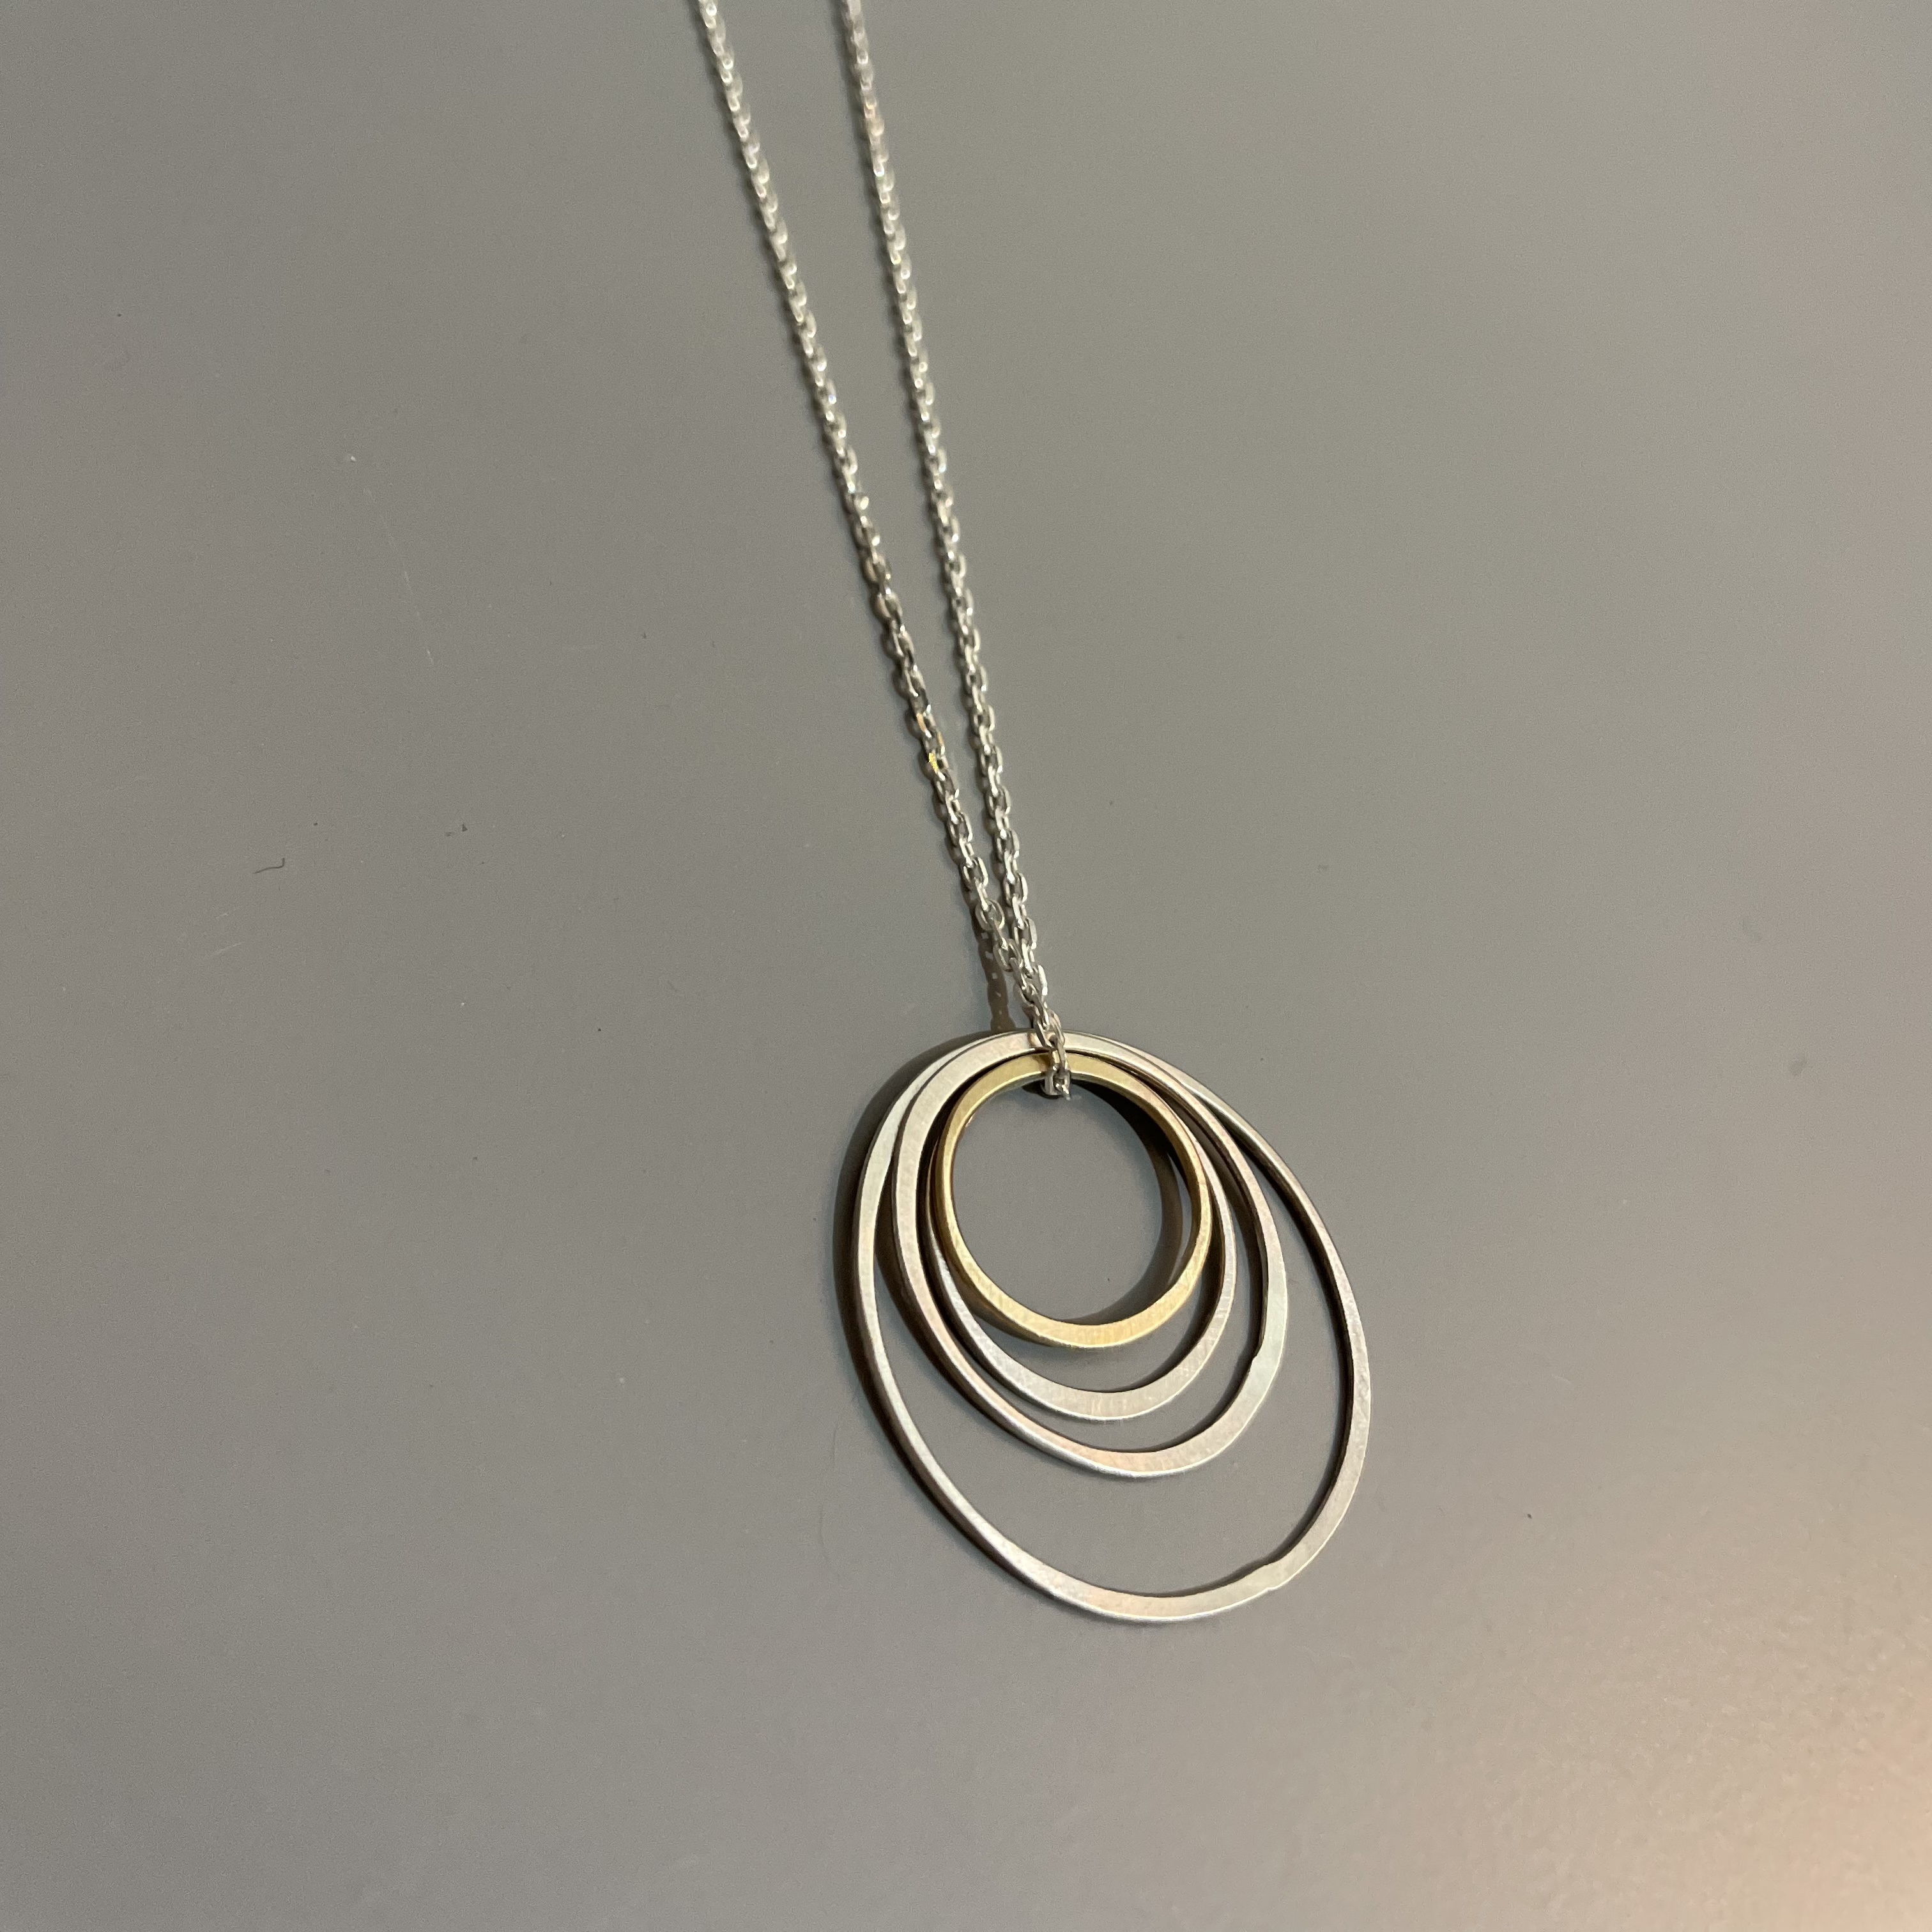 Yellow Gold and Silver Circle Necklace by Rose Teleri